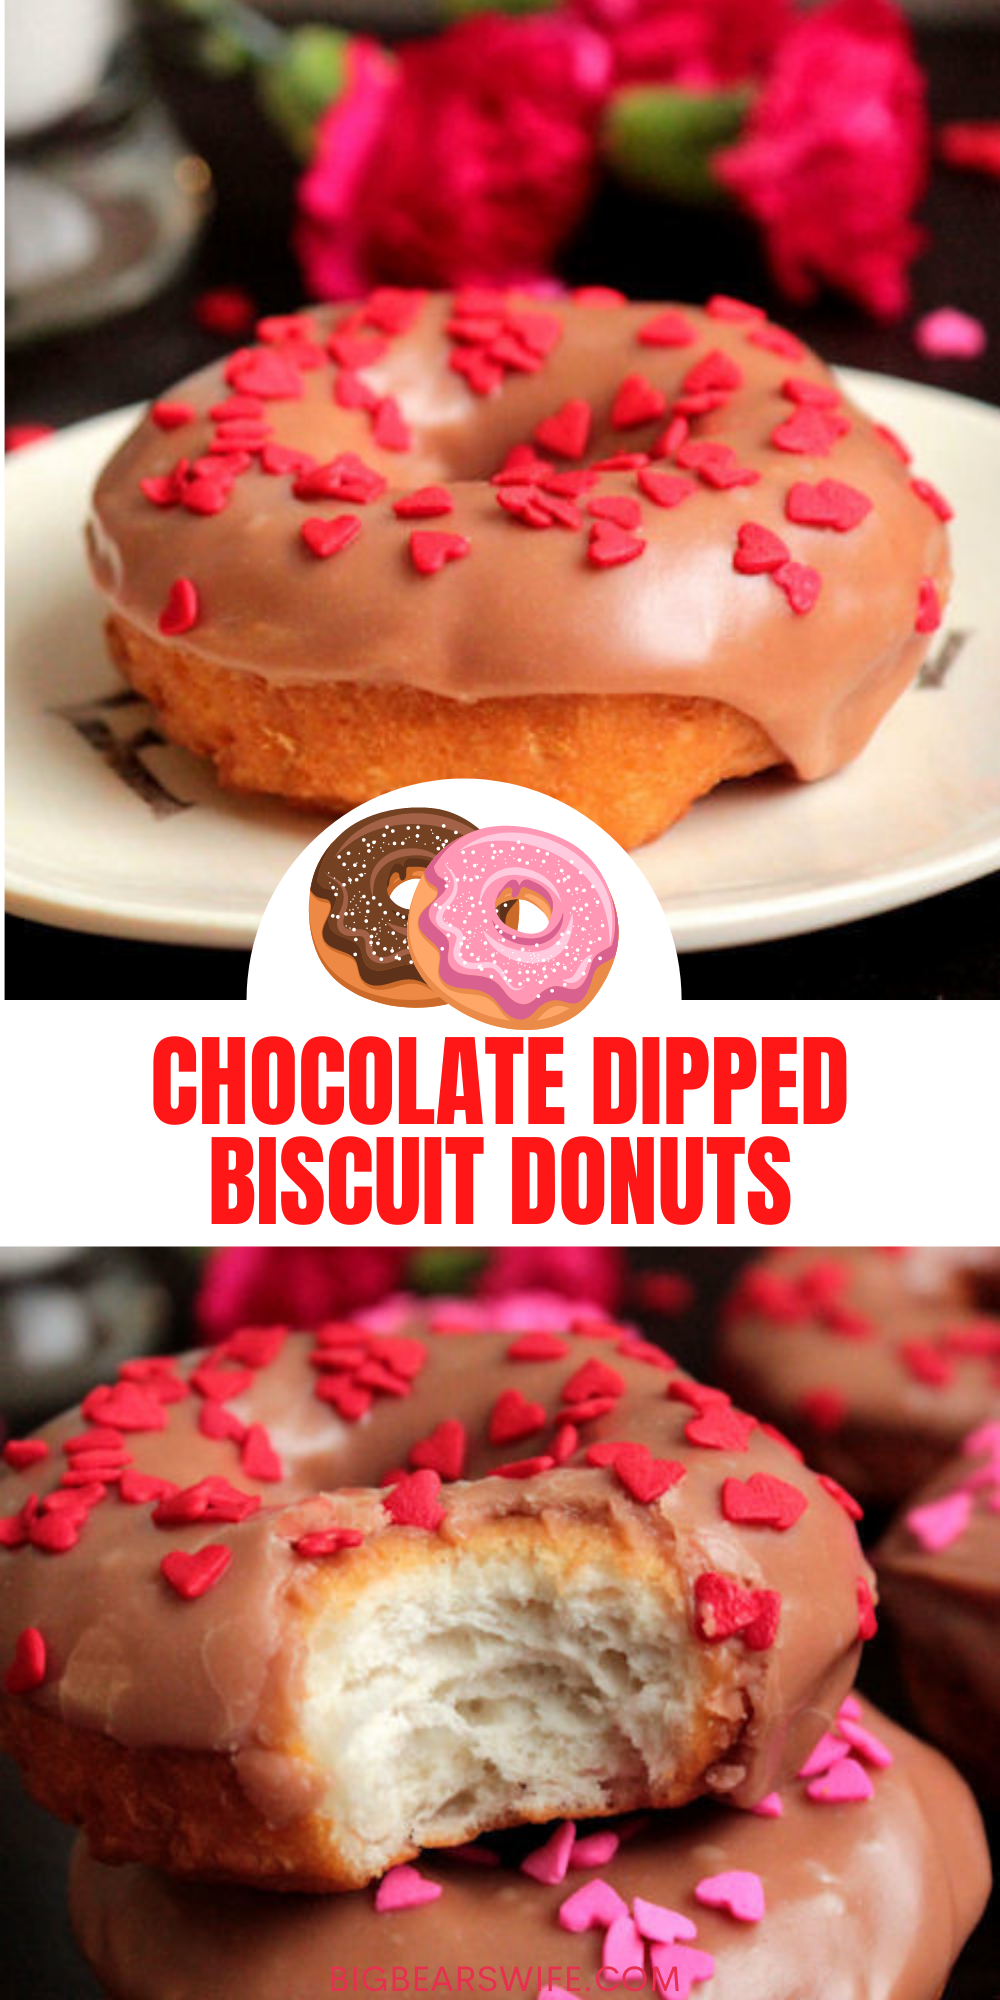 Want a quick and easy Valentines Donut for you sweetheart? I've got the perfect recipe for you! No donut making skills required! These use canned biscuits! via @bigbearswife